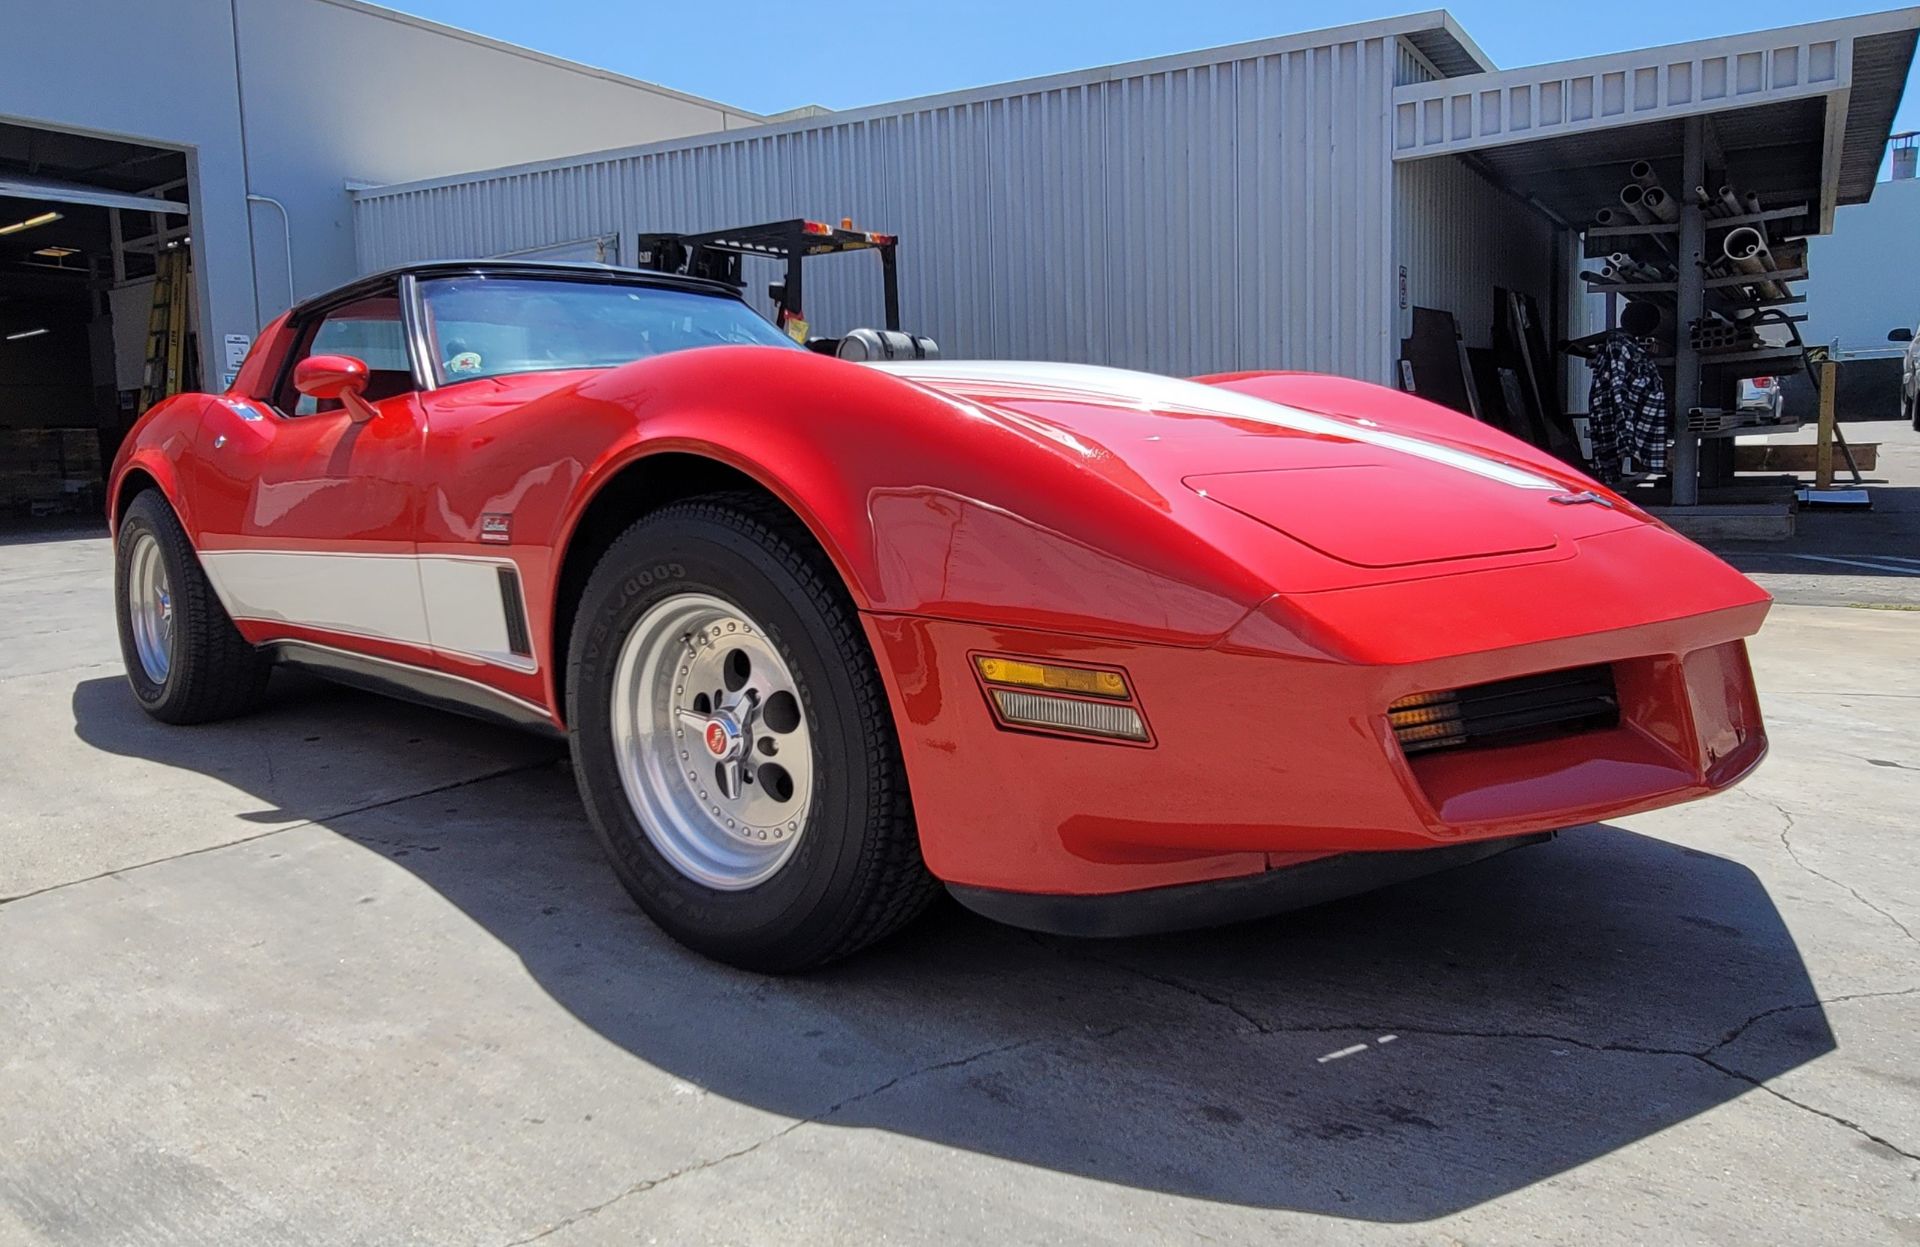 1980 CHEVROLET CORVETTE, WAS VIC EDELBROCK'S PERSONAL CAR BOUGHT FOR R&D, RED INTERIOR, TITLE ONLY. - Image 10 of 70